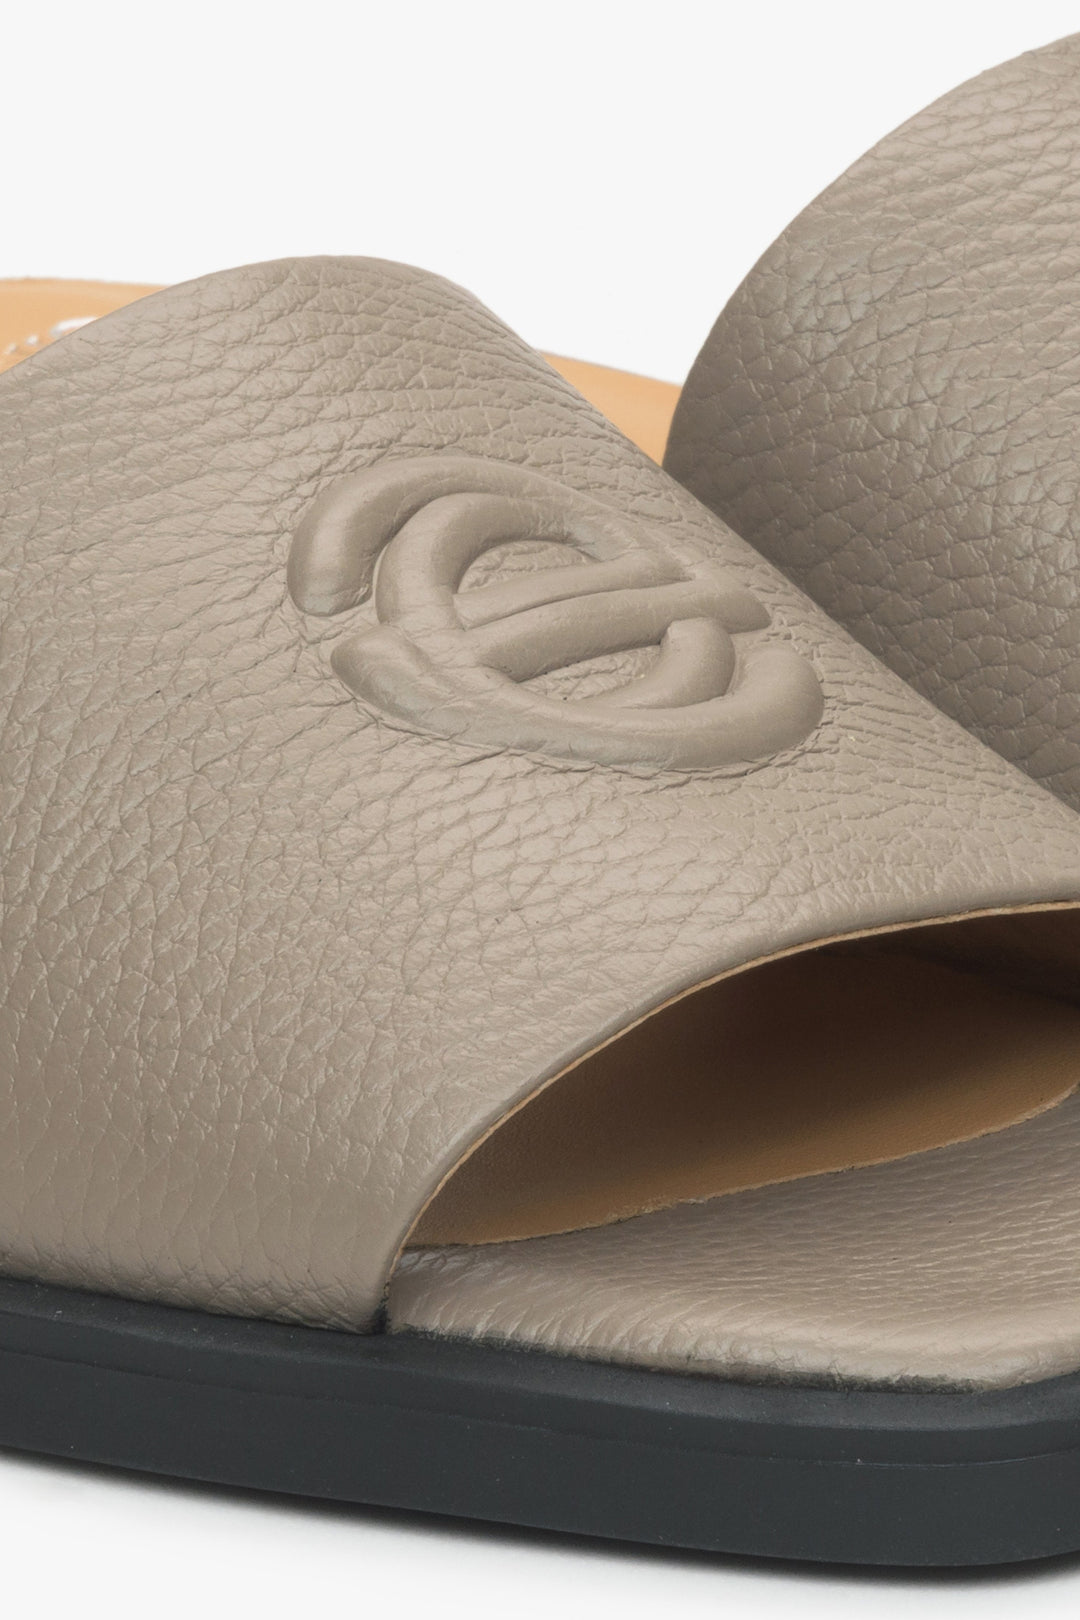 Women's grey flip-flops made of genuine leather by Estro - close-up on the details.